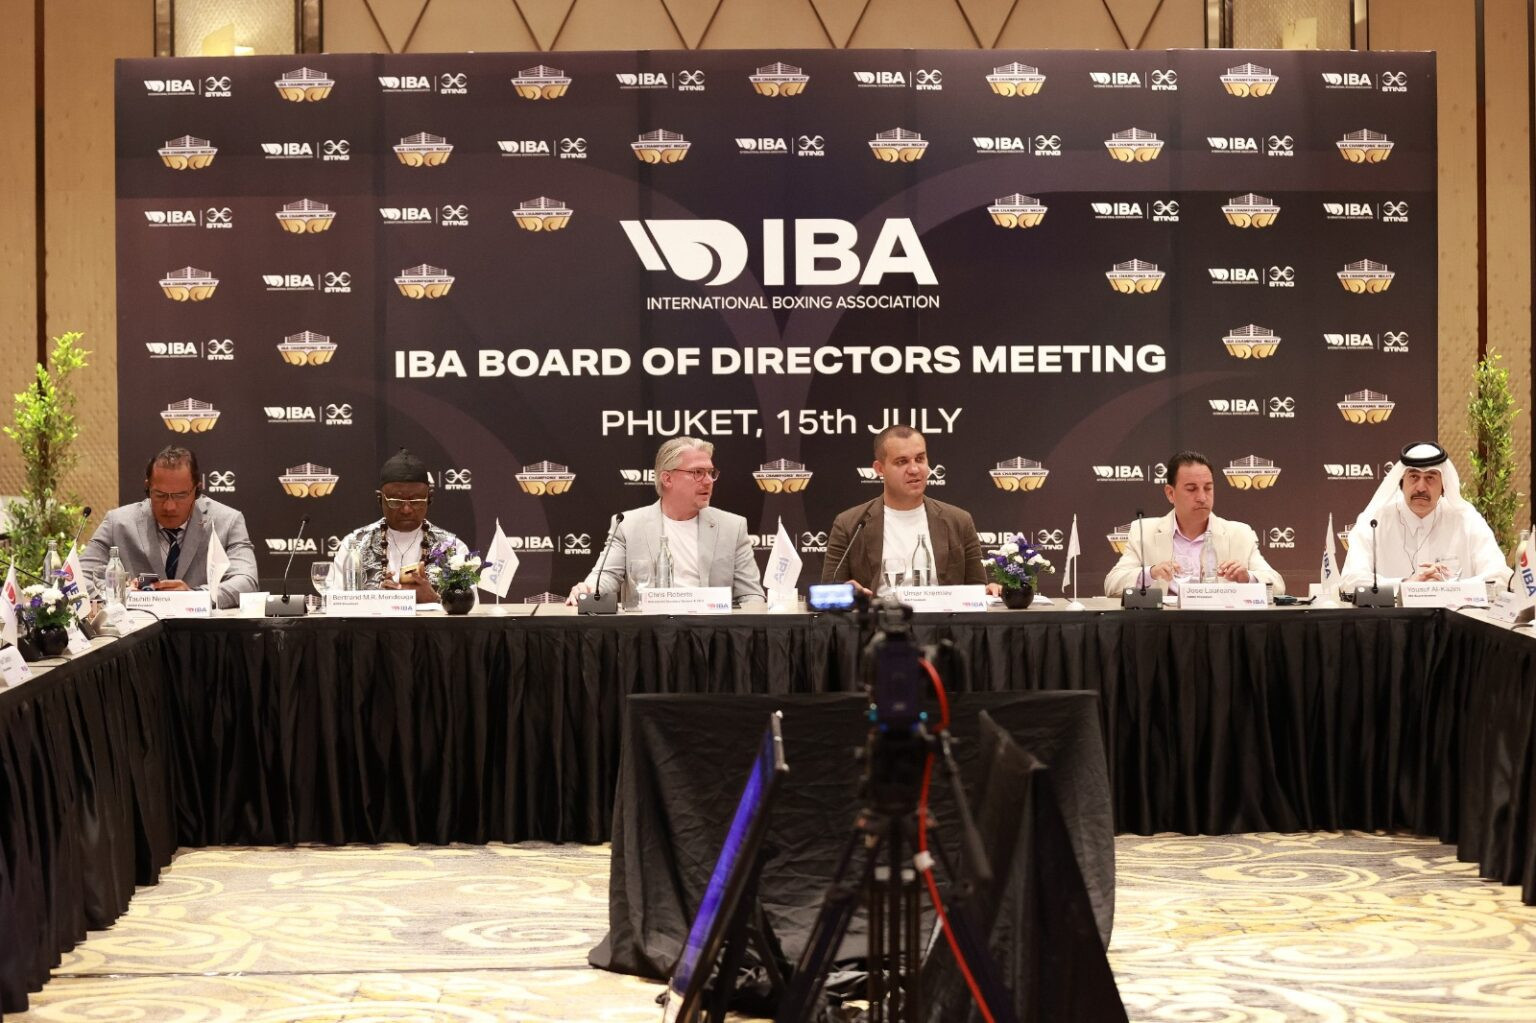 The IBA announced that China is to host International Boxing Day and the Global Boxing Forum during their meeting in Phuket, Thailand ©IBA